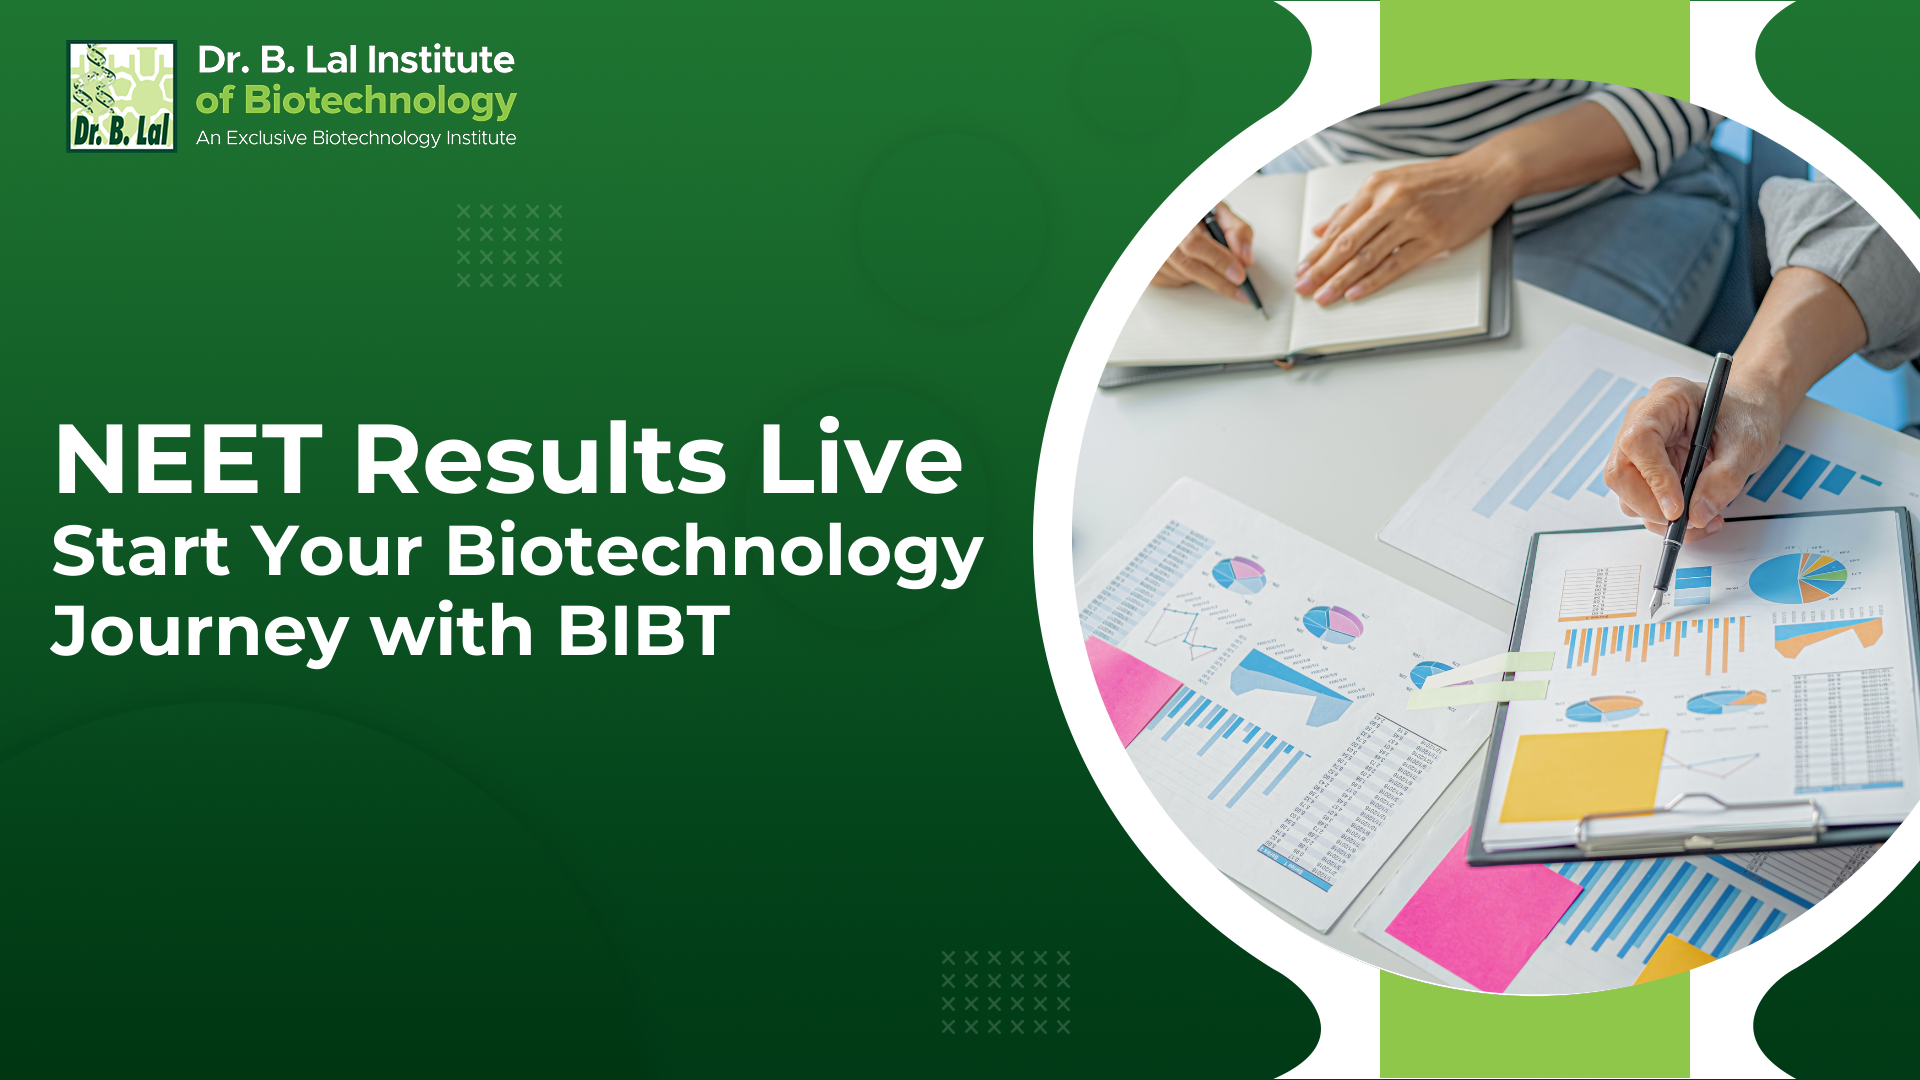 NEET Results Live: Start Your Biotechnology Journey with BIBT